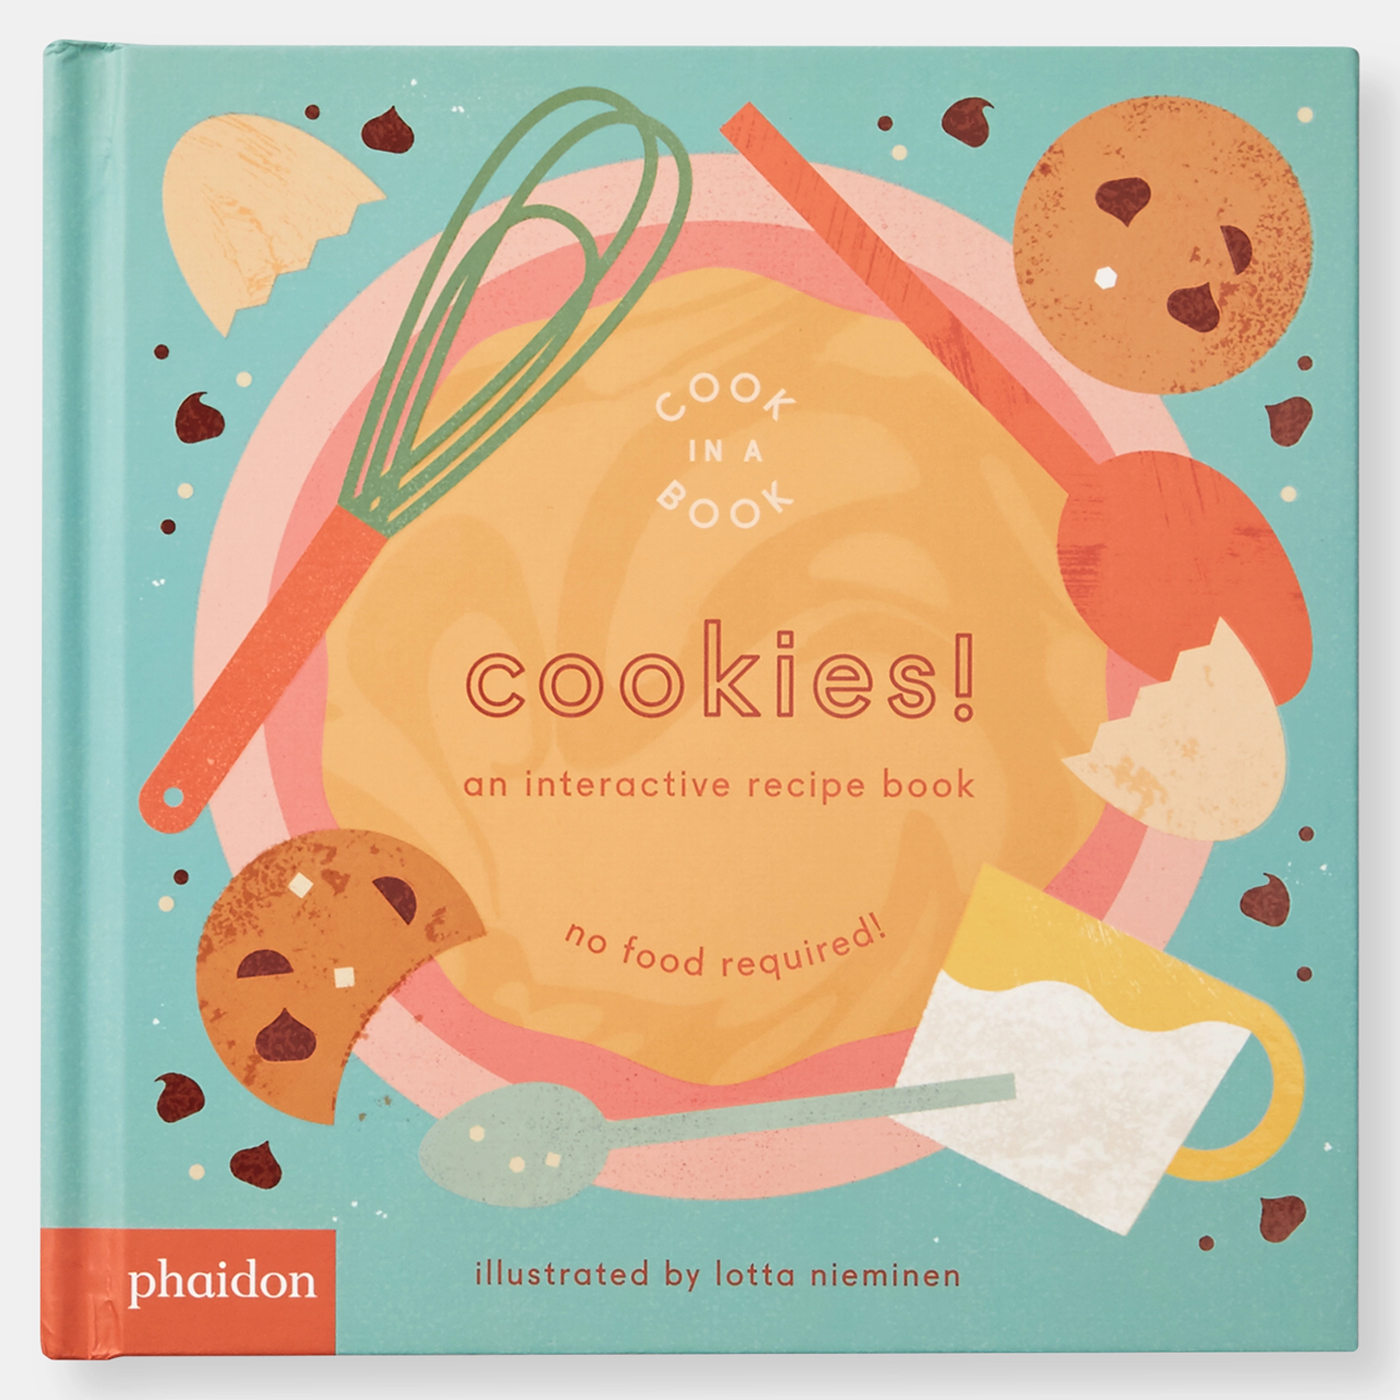  Cook in a Book: Cookies!